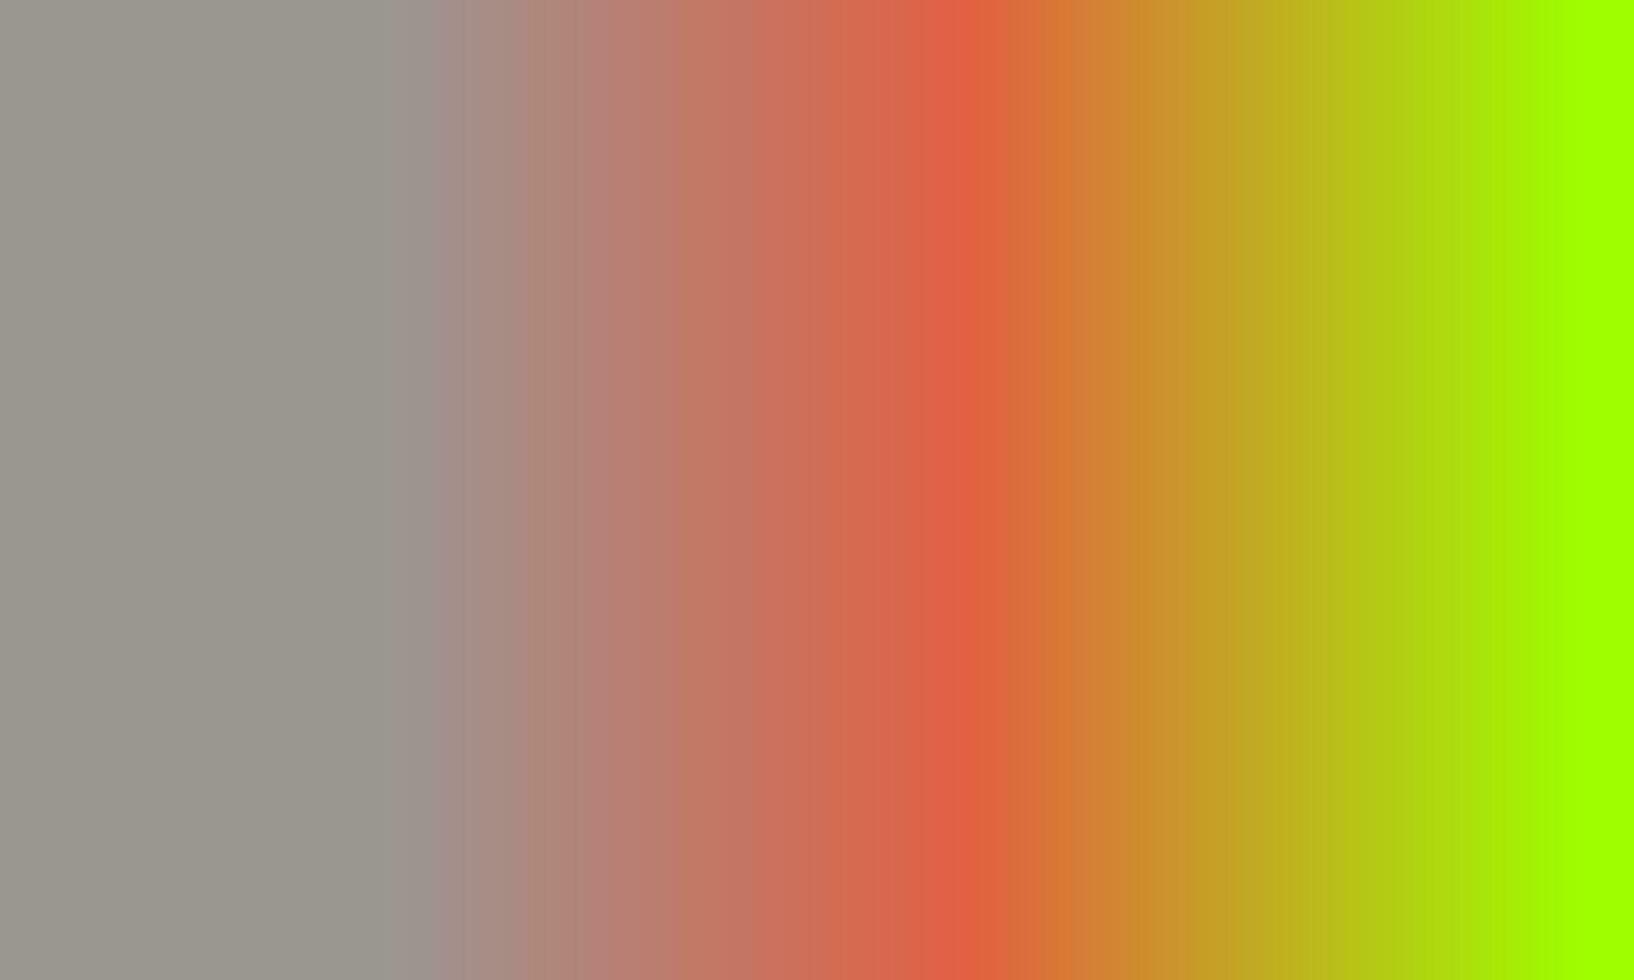 Design simple highlighter green,red and grey gradient color illustration background photo